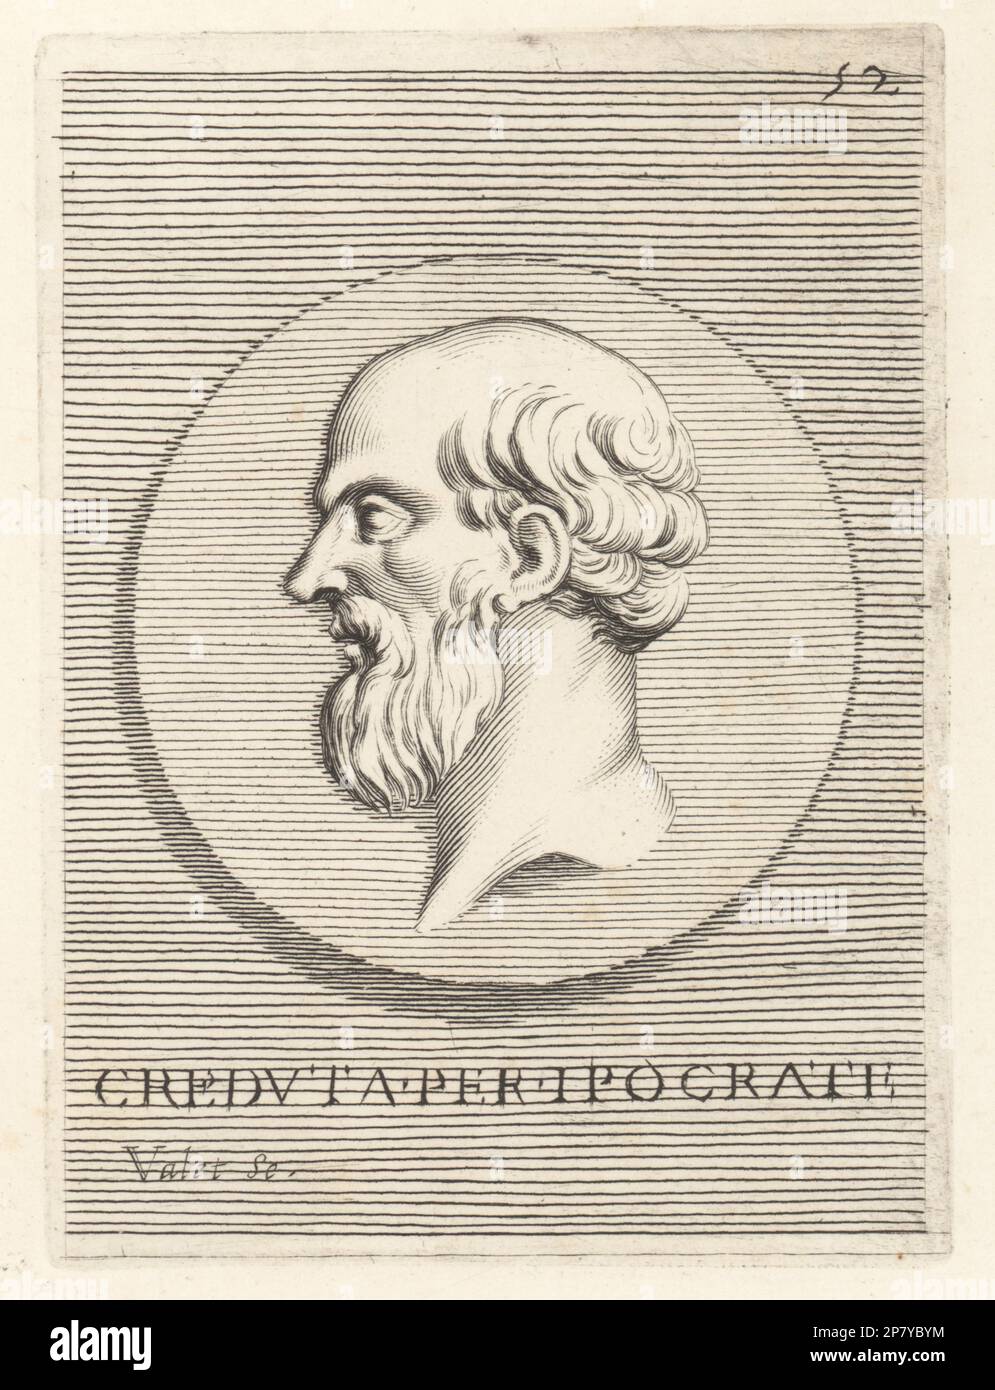 Head believed to be Hippocrates from Kos, famous ancient Greek physician c.470-370 BC. Head of a bearded man with bald head from a round carnelian gem. Creduta per Ippocrate. Copperplate engraving by Guillaume Vallet after Giovanni Angelo Canini from Iconografia, cioe disegni d'imagini de famosissimi monarchi, regi, filososi, poeti ed oratori dell' Antichita, Drawings of images of famous monarchs, kings, philosophers, poets and orators of Antiquity, Ignatio de’Lazari, Rome, 1699. Stock Photo